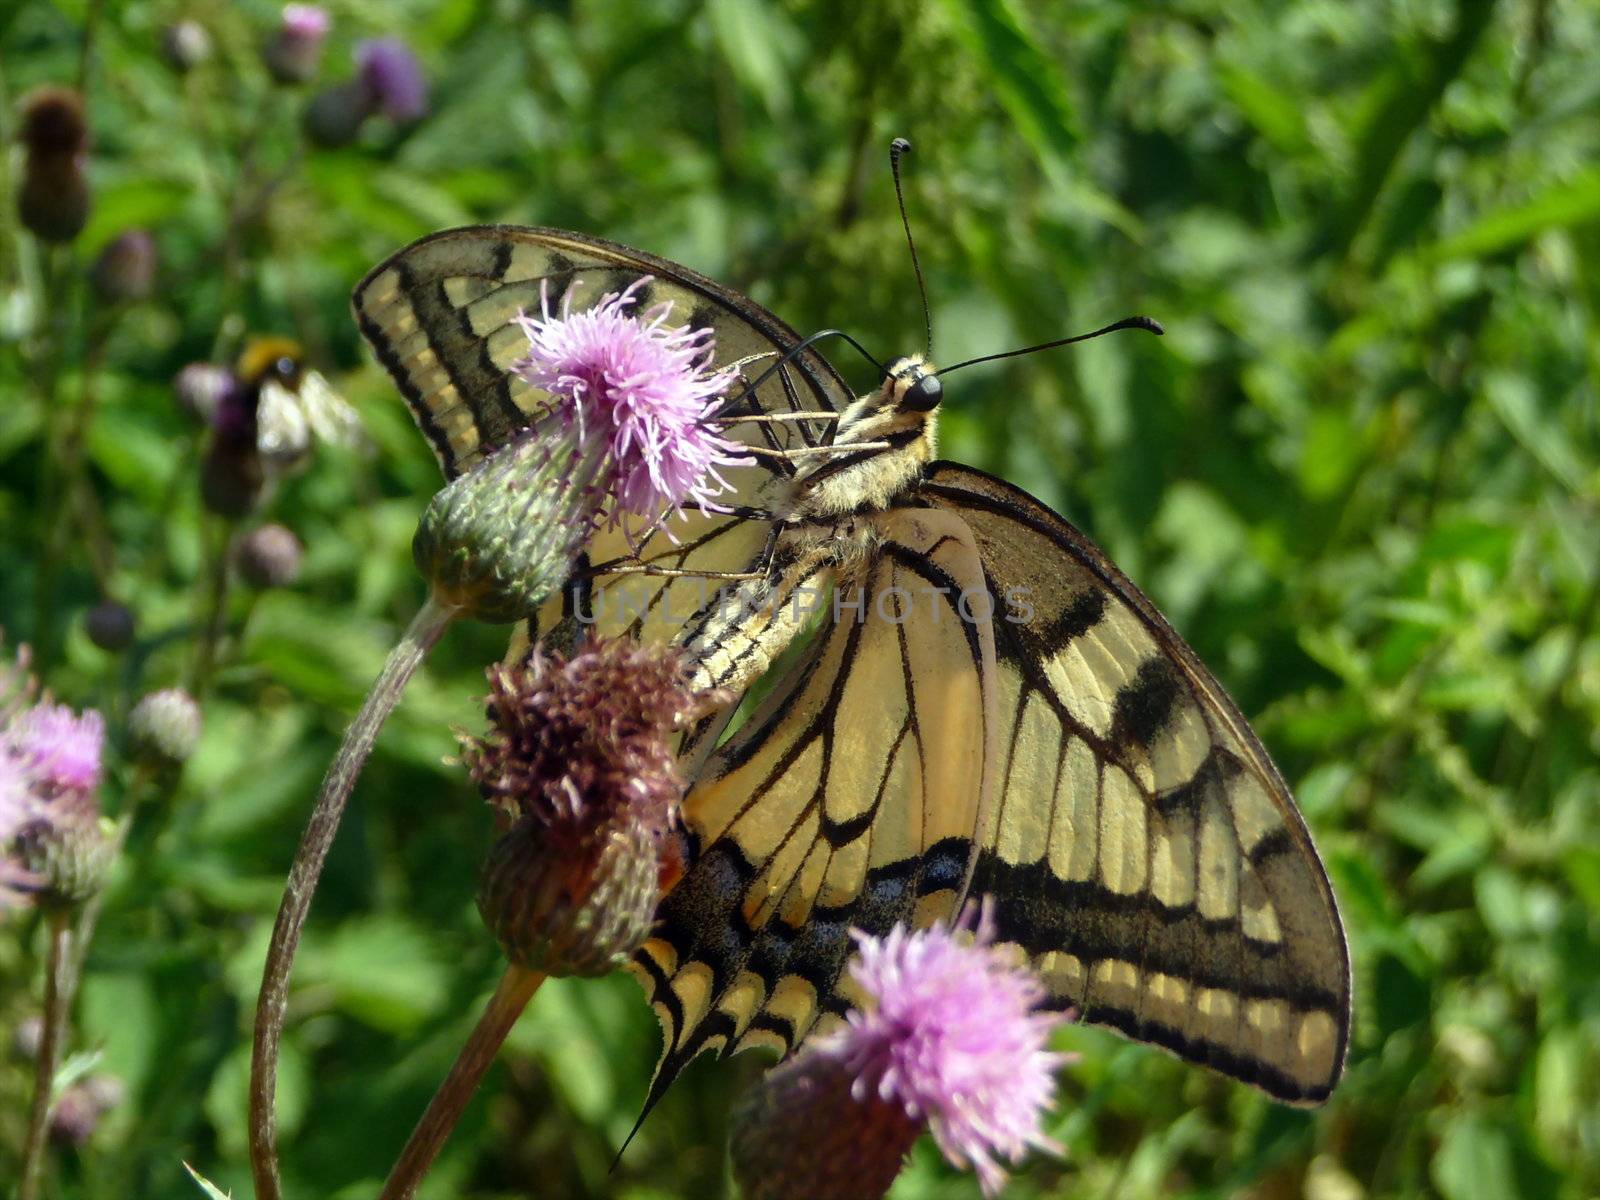 Swallowtail butterfly on the flower by tomatto